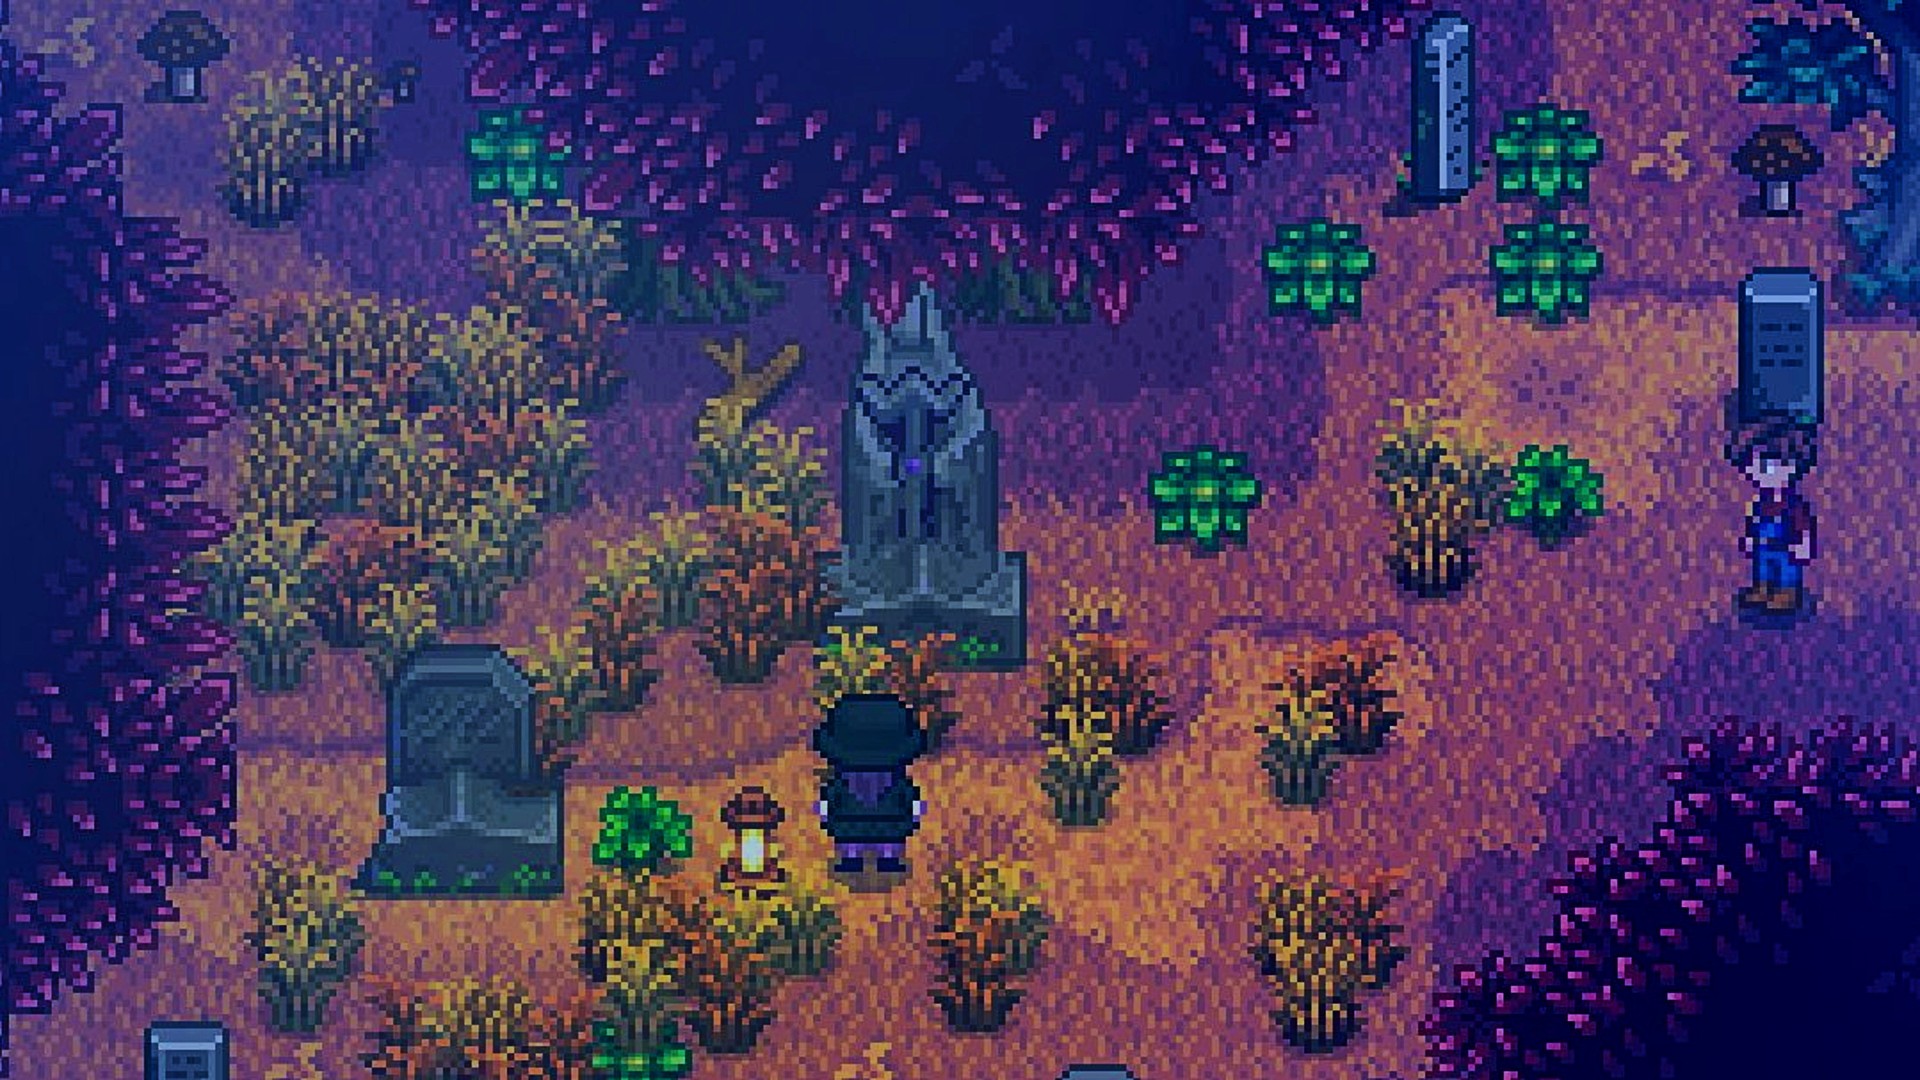 This Stardew Valley mod adds a missing persons mystery to solve